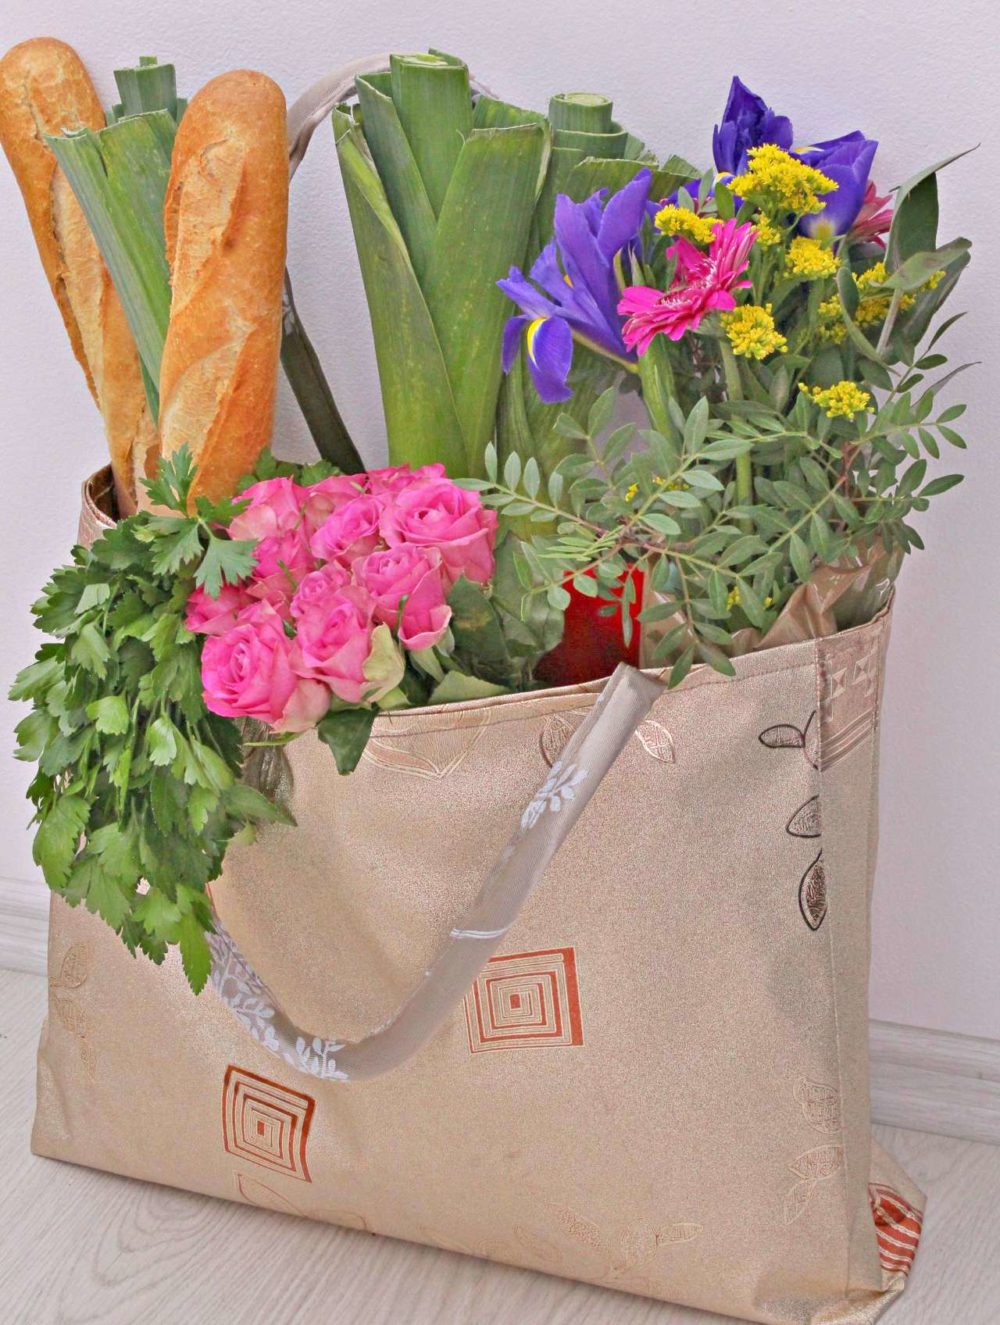 Easy grocery bag sewing pattern